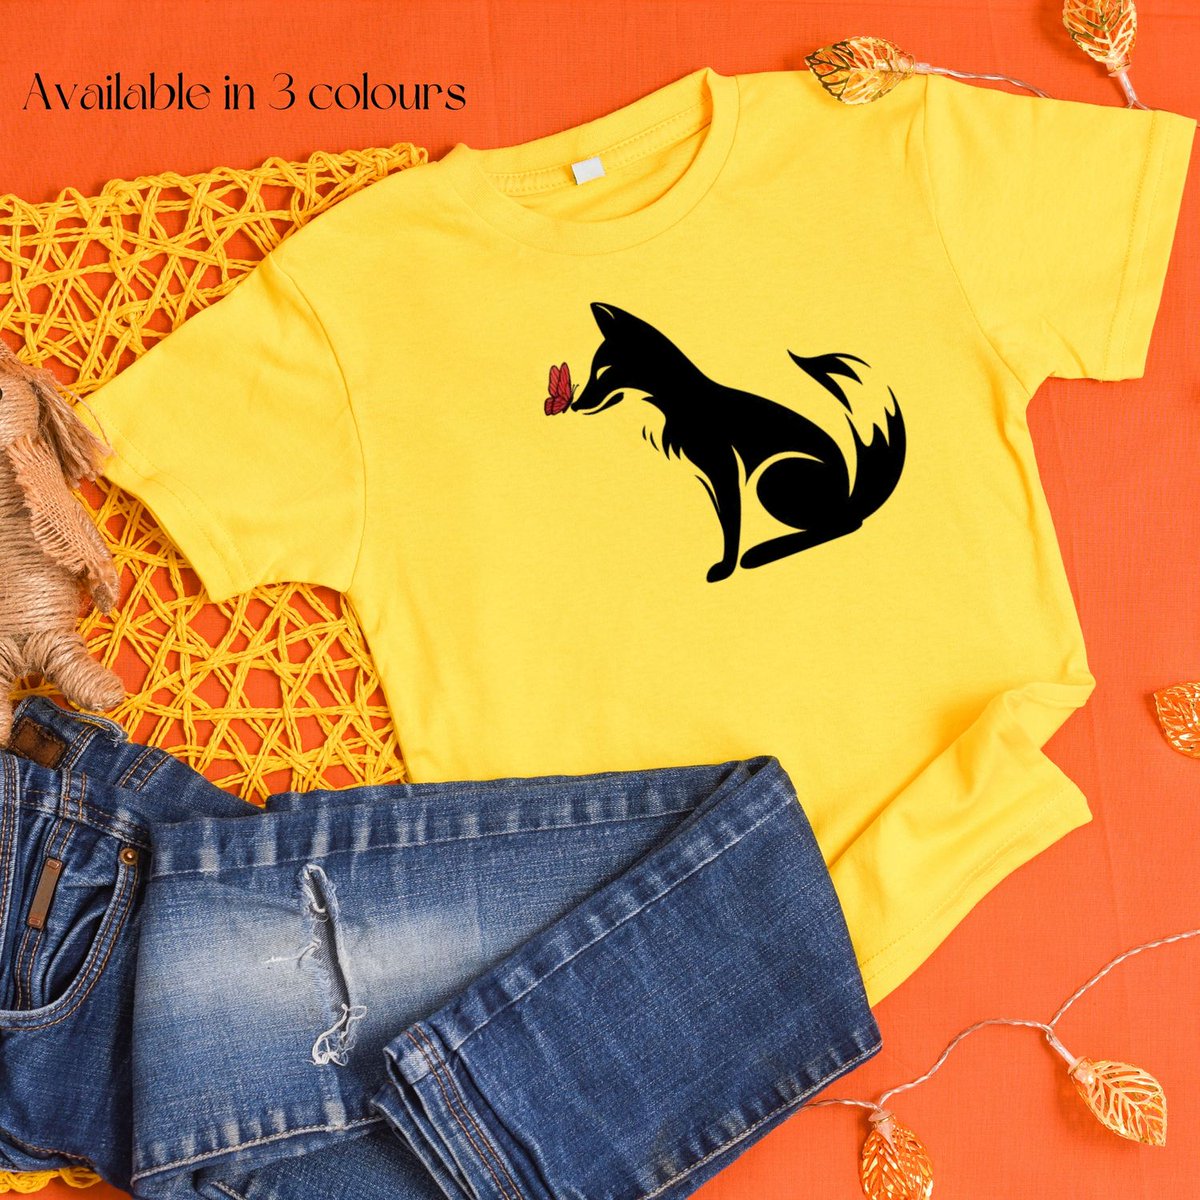 Good morning #earlybiz Did you know my 20% sale is on everything in store including this fabulous summery fox design? Details 👇 to grab yours